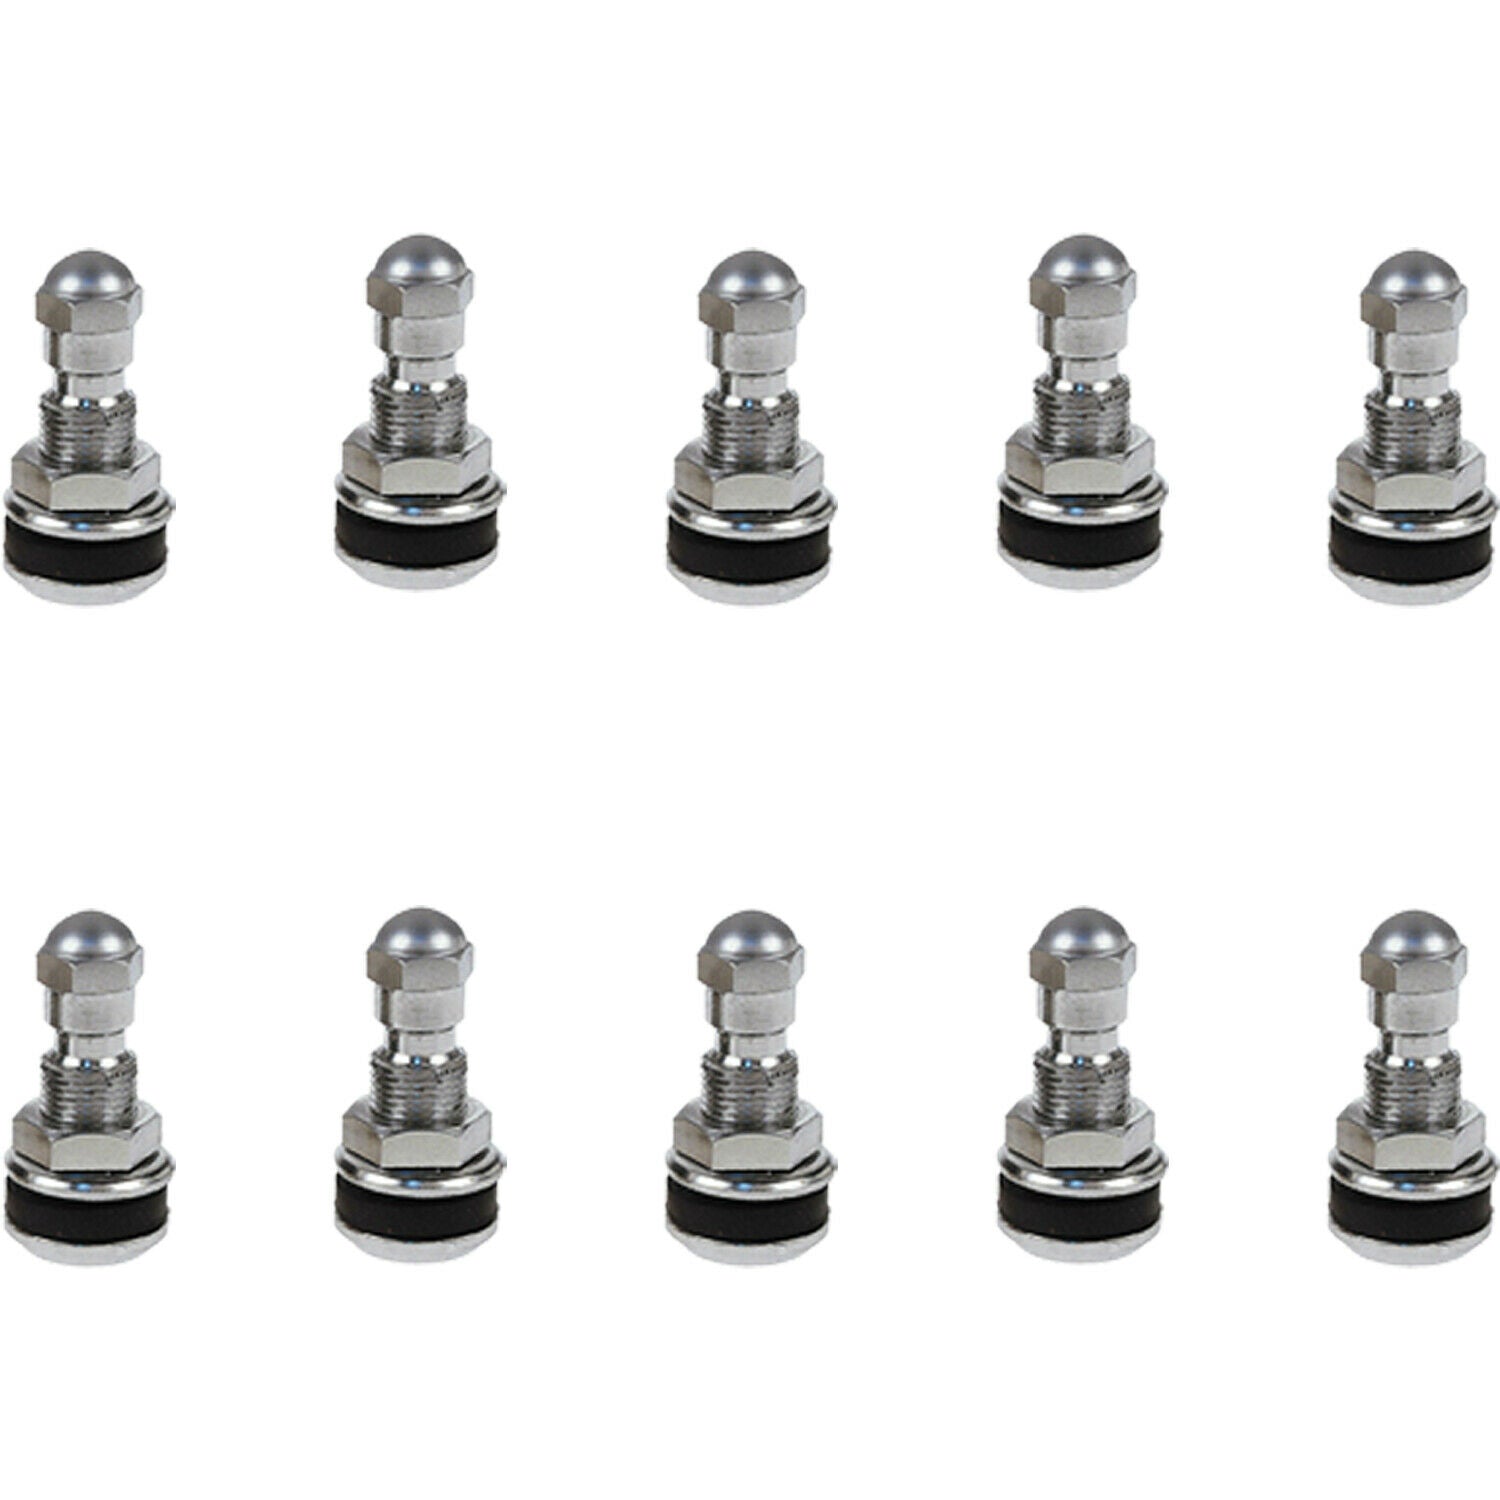 GR-5991B Chrome Clamp In Valve Stem for .453 and .625 Valve Holes Pack of 10